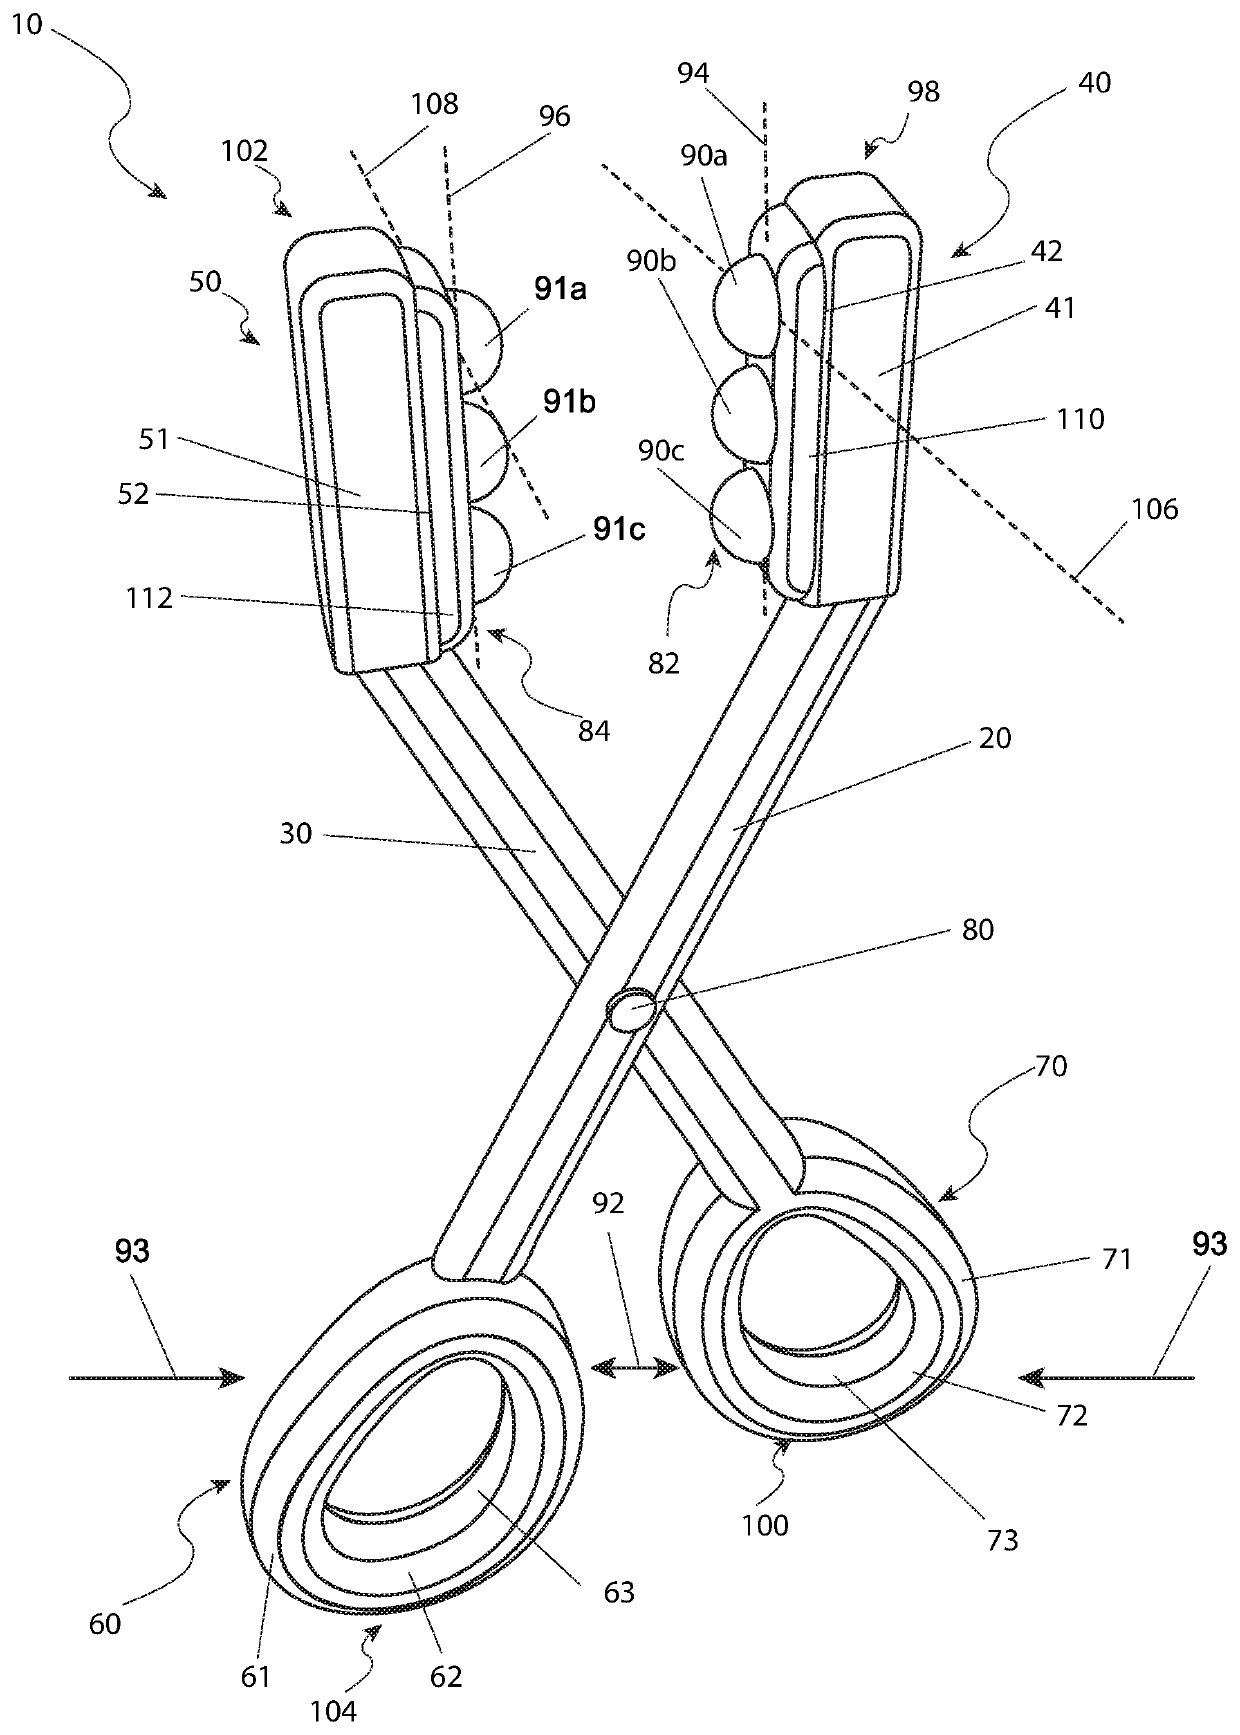 Foot massaging device with first and second handle assemblies